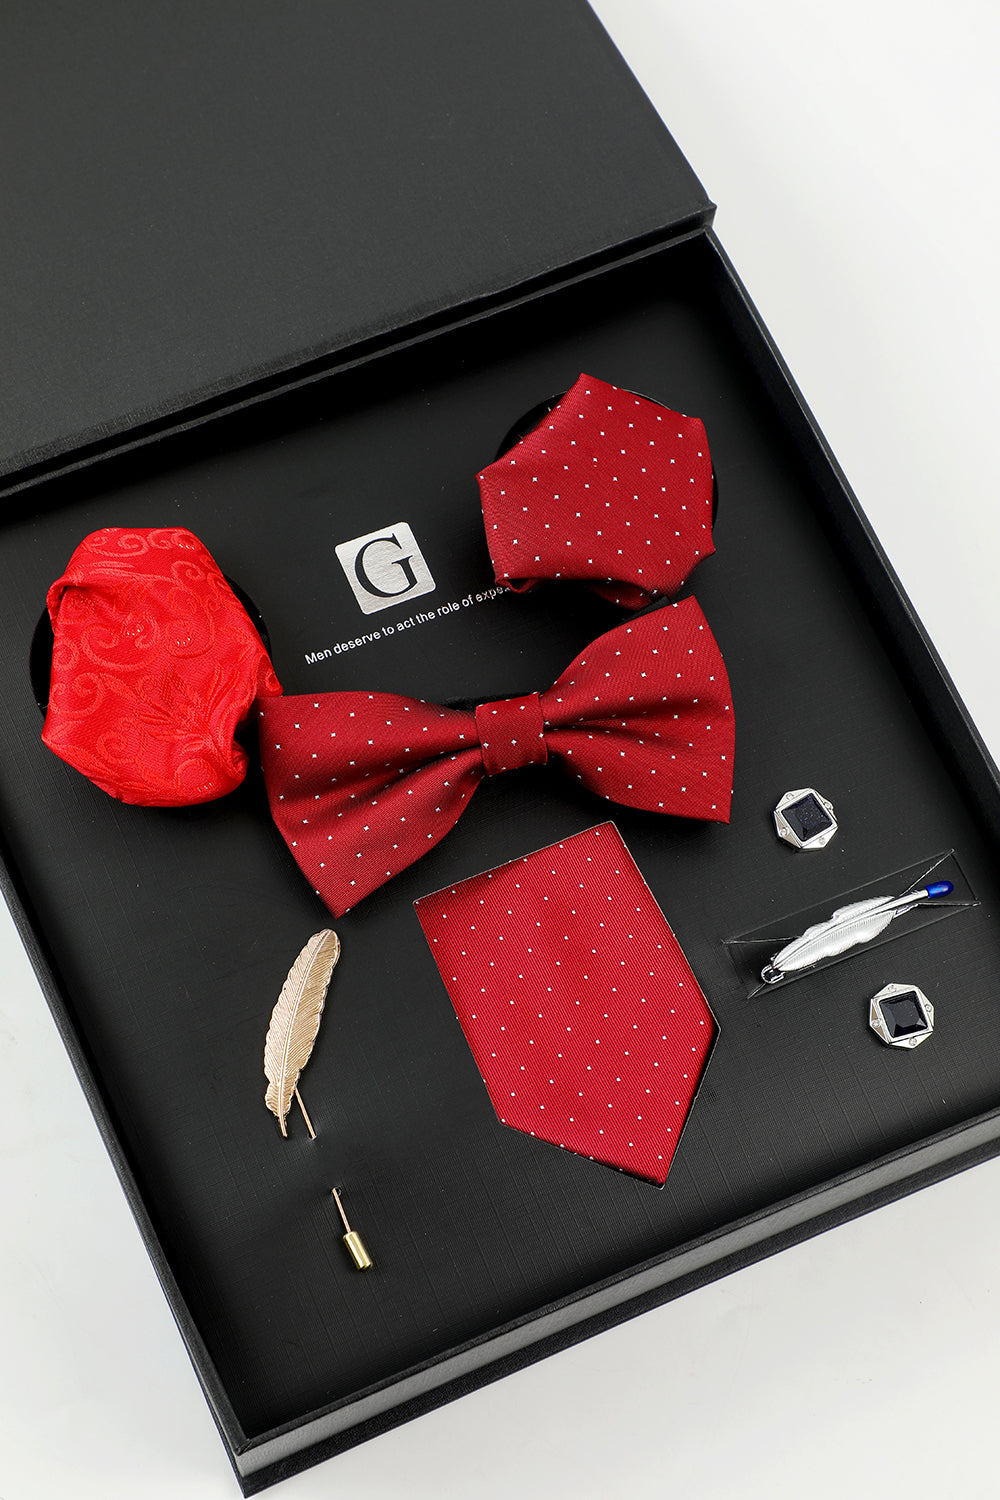 Red Men's Accessory Set Tie and Bow Tie Two Pocket Square Lapel Pin Tie Clip Cufflinks